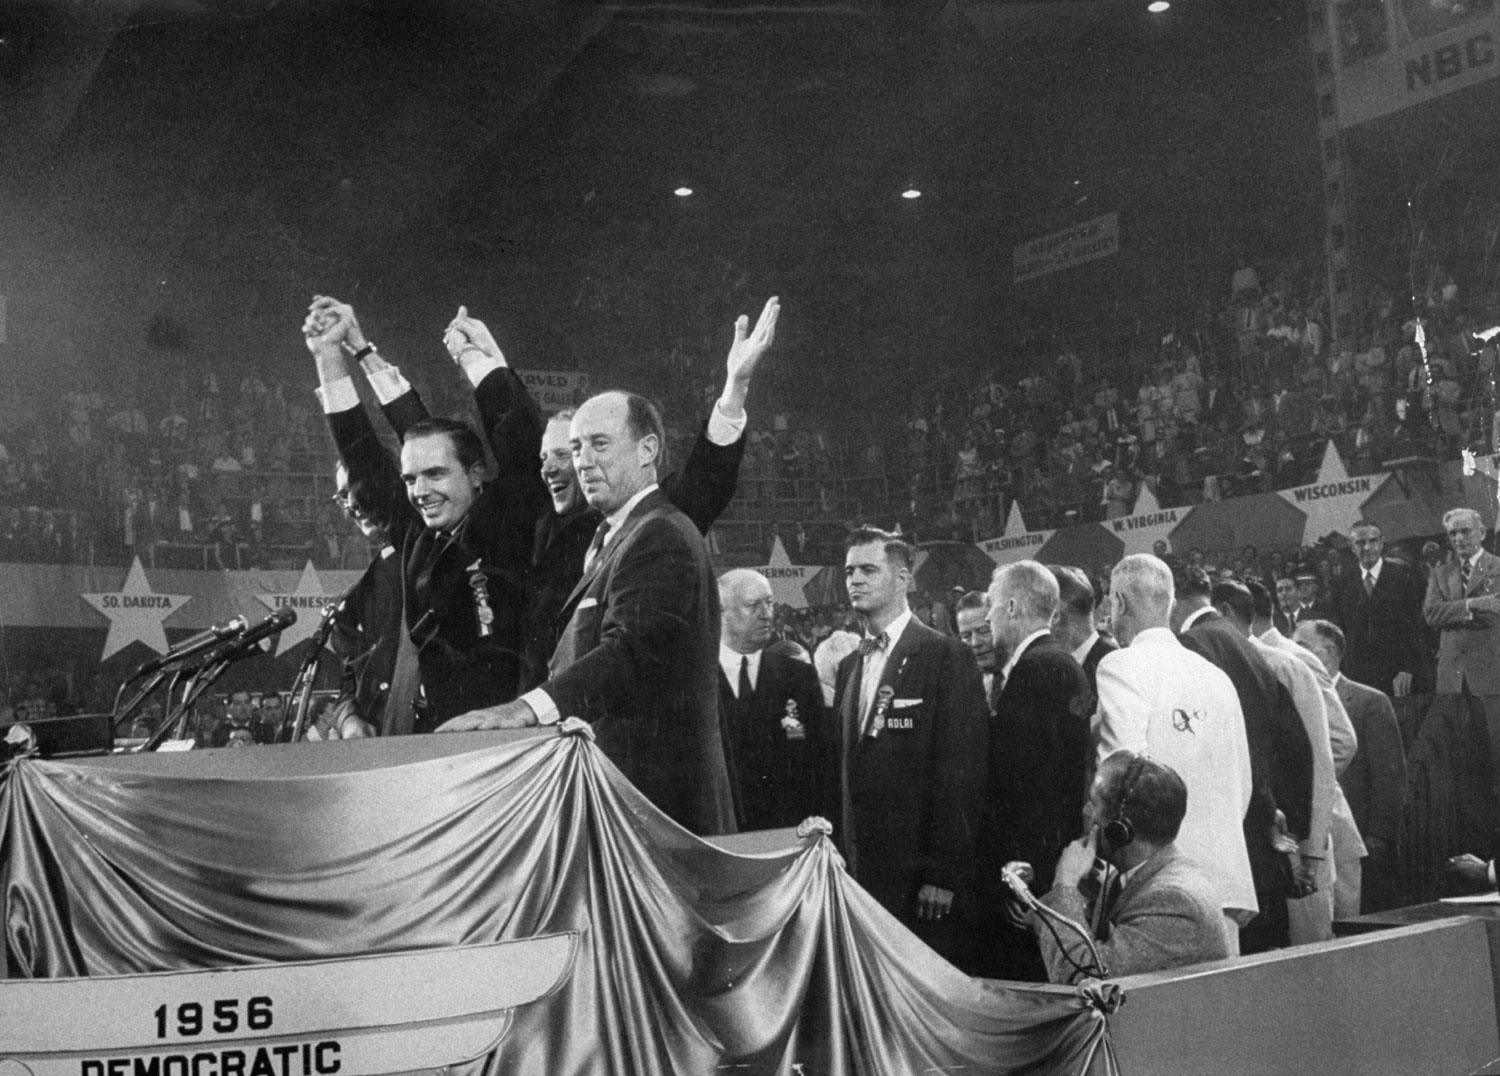 Left to right: Senator Estes Kefauver, Gov. Frank Clement, Sen. Albert Gore and candidate Adlai Stevenson at the 1956 Democratic National Convention in Chicago.